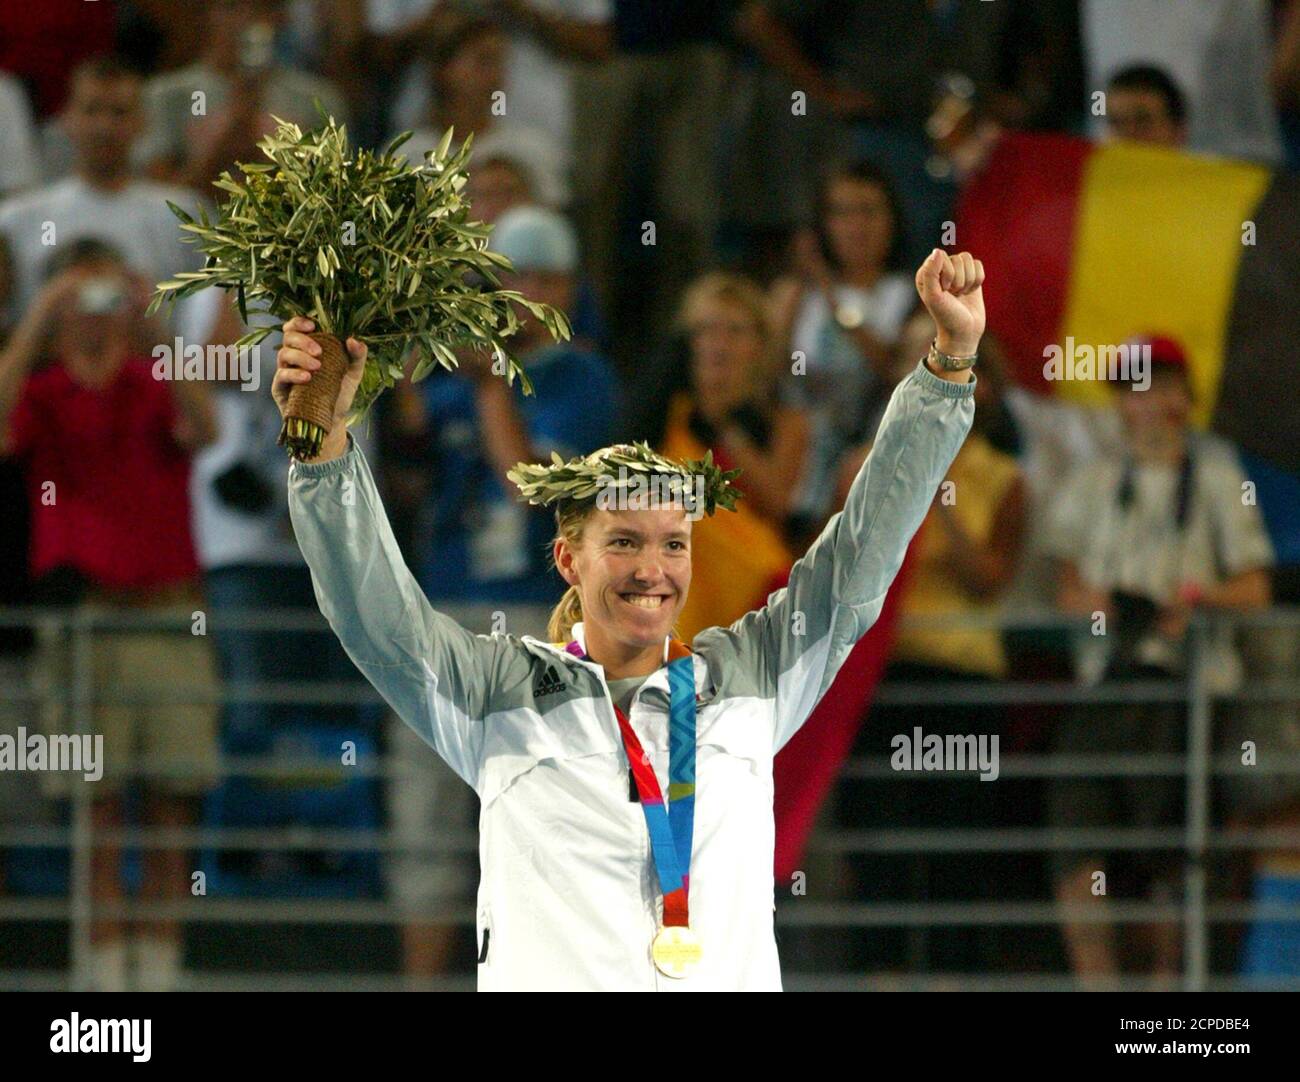 Gold medallist Belgiums Henin-Hardenne waves from the podium after the ceremony for the women's single tennis event of Athens 2004 Olympic Games.  Gold medallist Belgium's Justine Henin-Hardenne waves from the podium after the ceremony for the women's single tennis event of Athens 2004 Olympic Games August 21, 2004. France's Amelie Mauresmo won silver medal and Australia's Alicia Molik won bronze medal. REUTERS/Carlos Barria Stock Photo